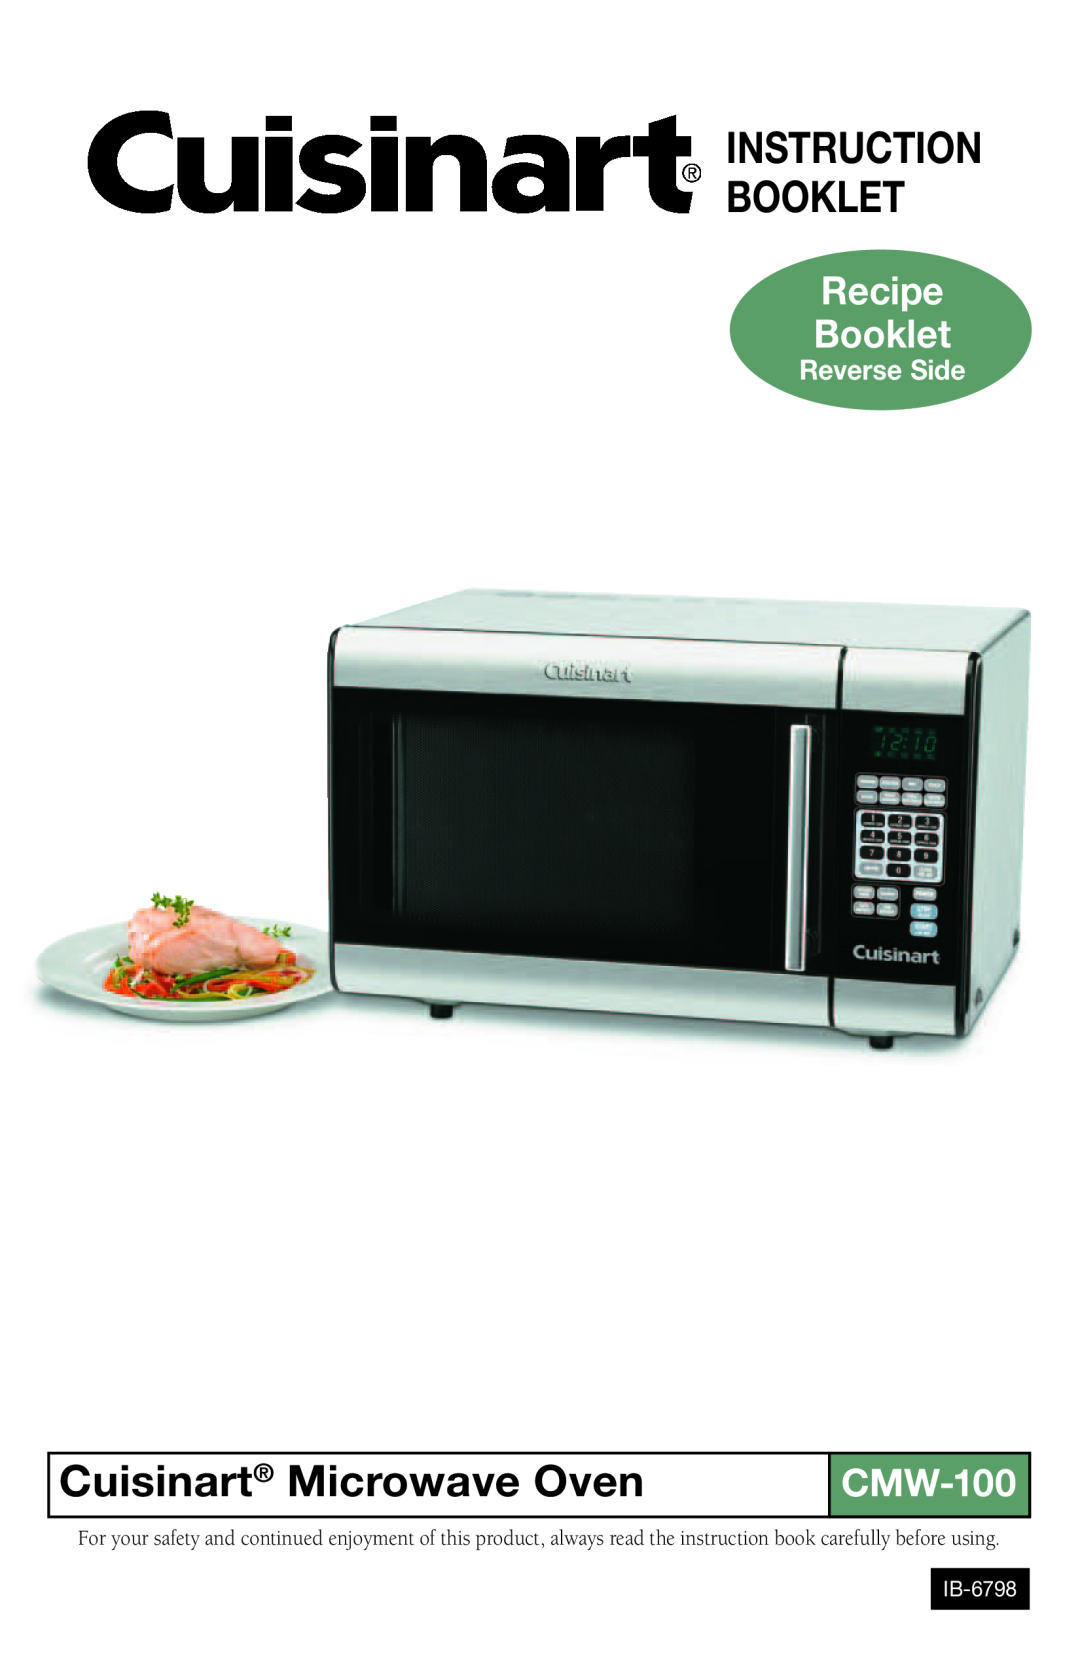 Cuisinart CMW-100 manual Instruction Booklet, Cuisinart Microwave Oven, Recipe Booklet, Reverse Side, IB-6798 